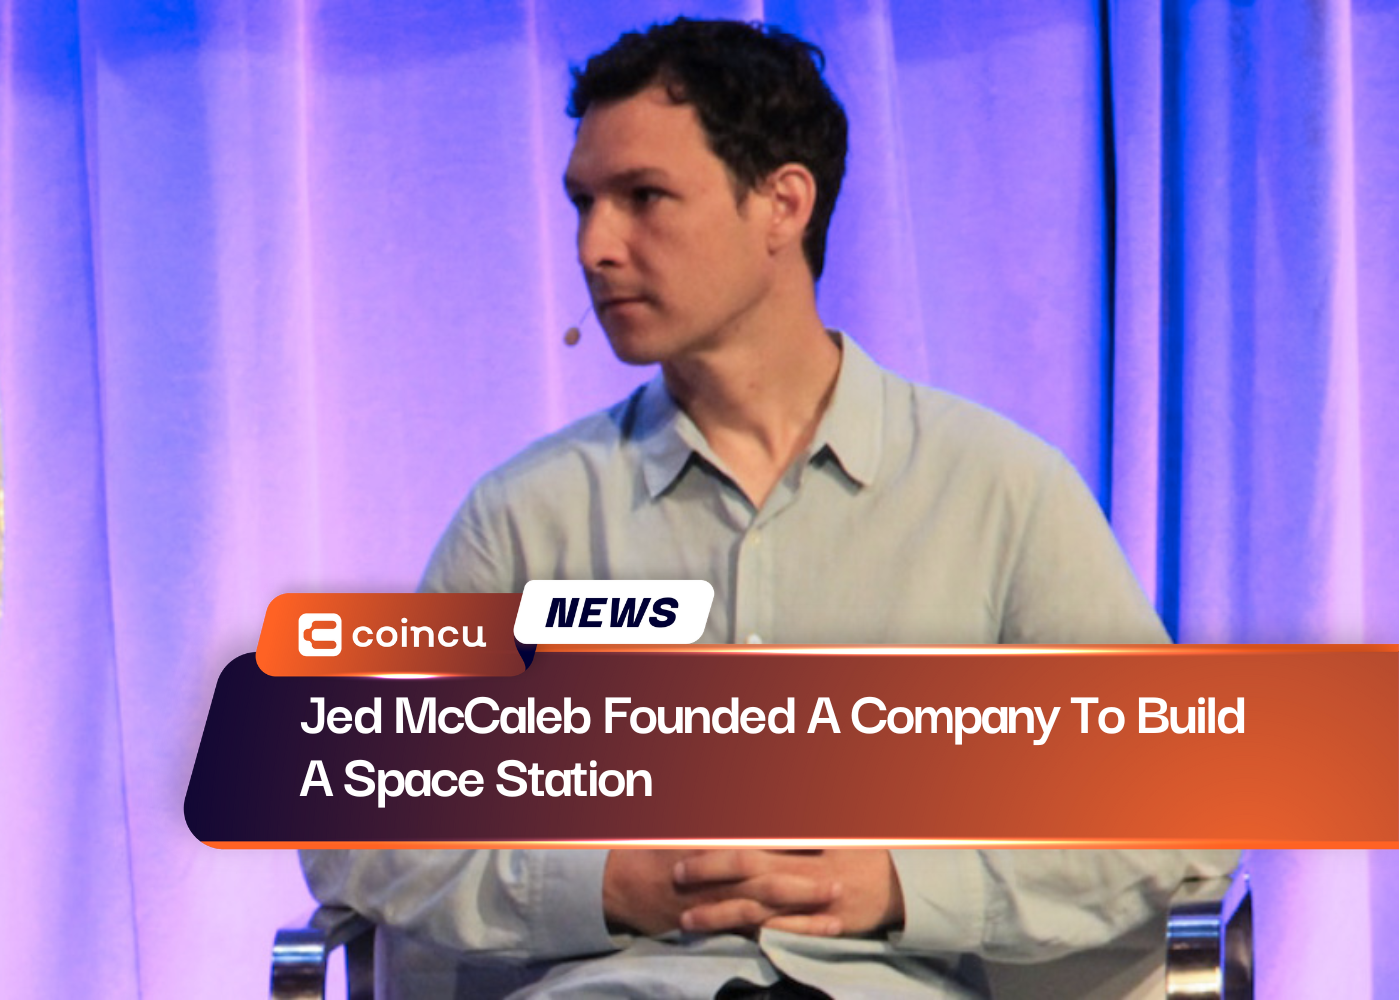 Jed McCaleb Founded A Company To Build A Space Station